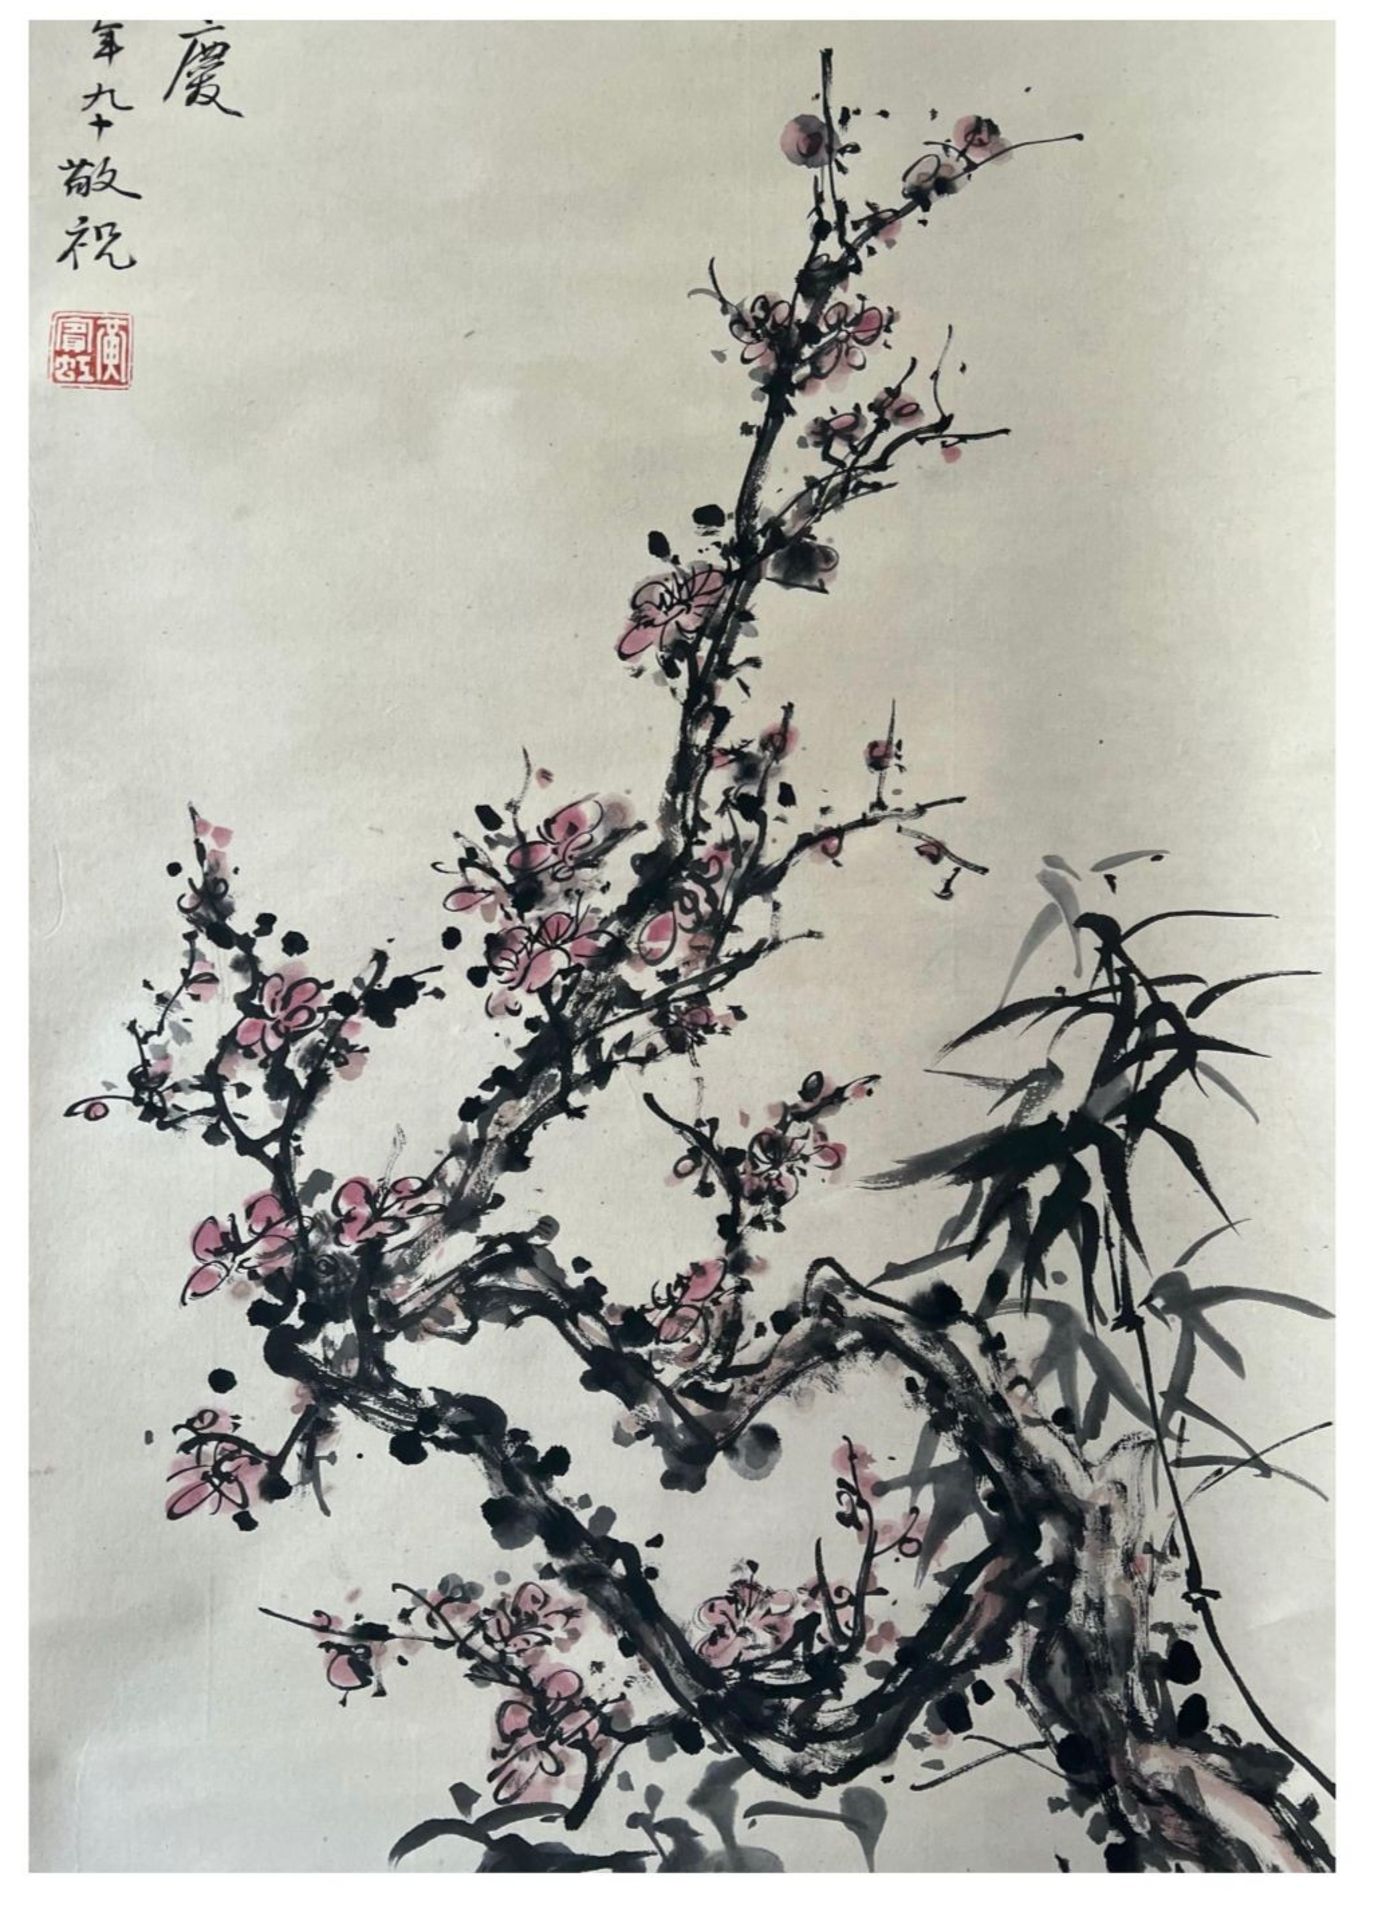 Plum blossom and bamboos - Chinese ink and watercolour on paper scroll. In memory of the noble - Image 4 of 7